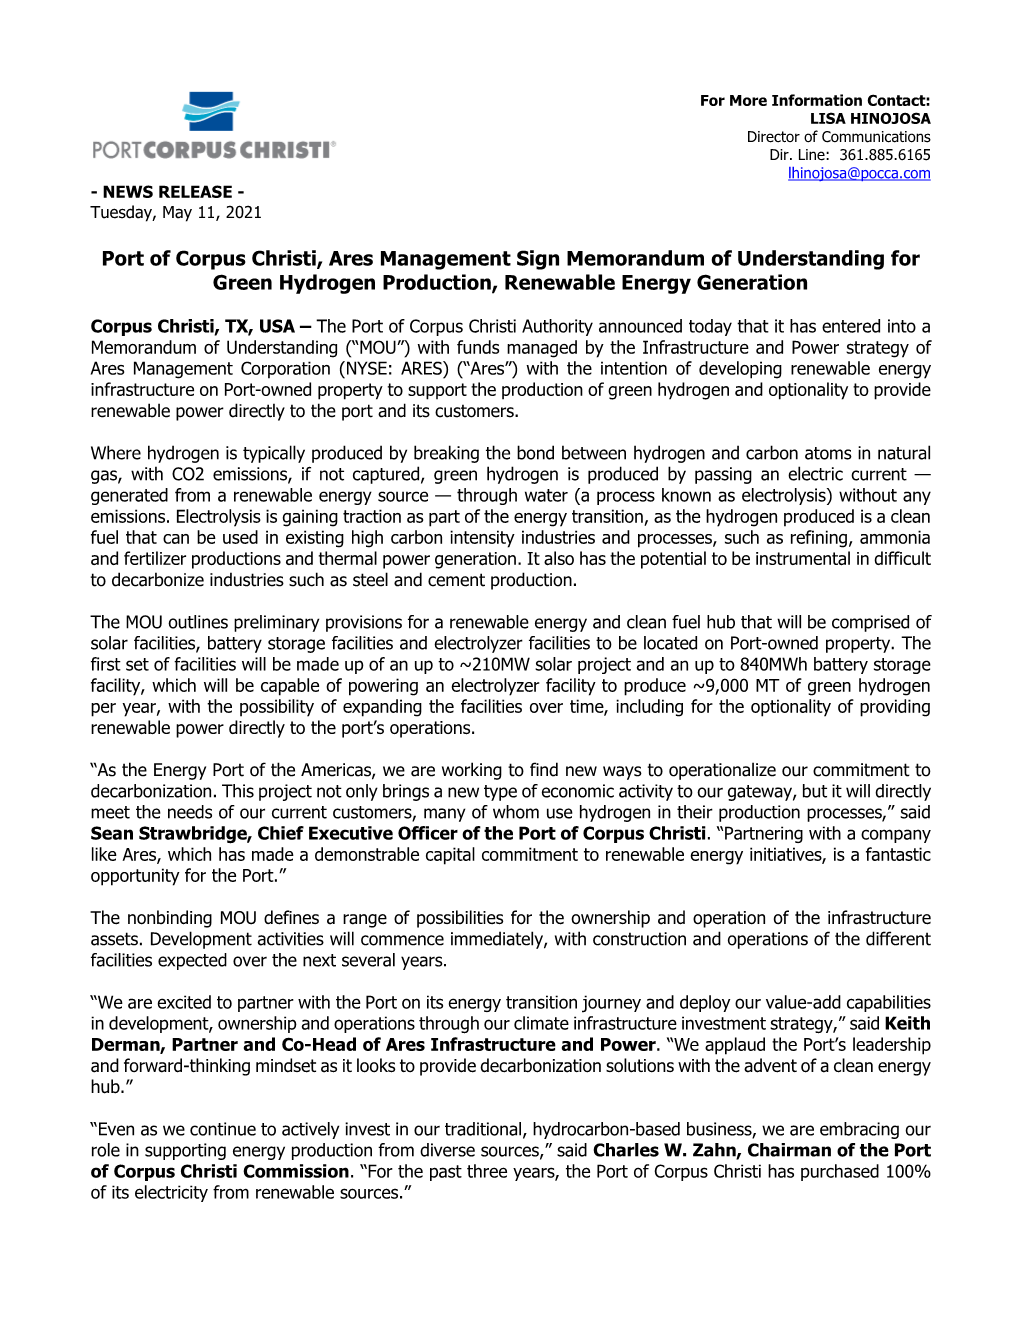 PDF of Press Release – PCCA Ares